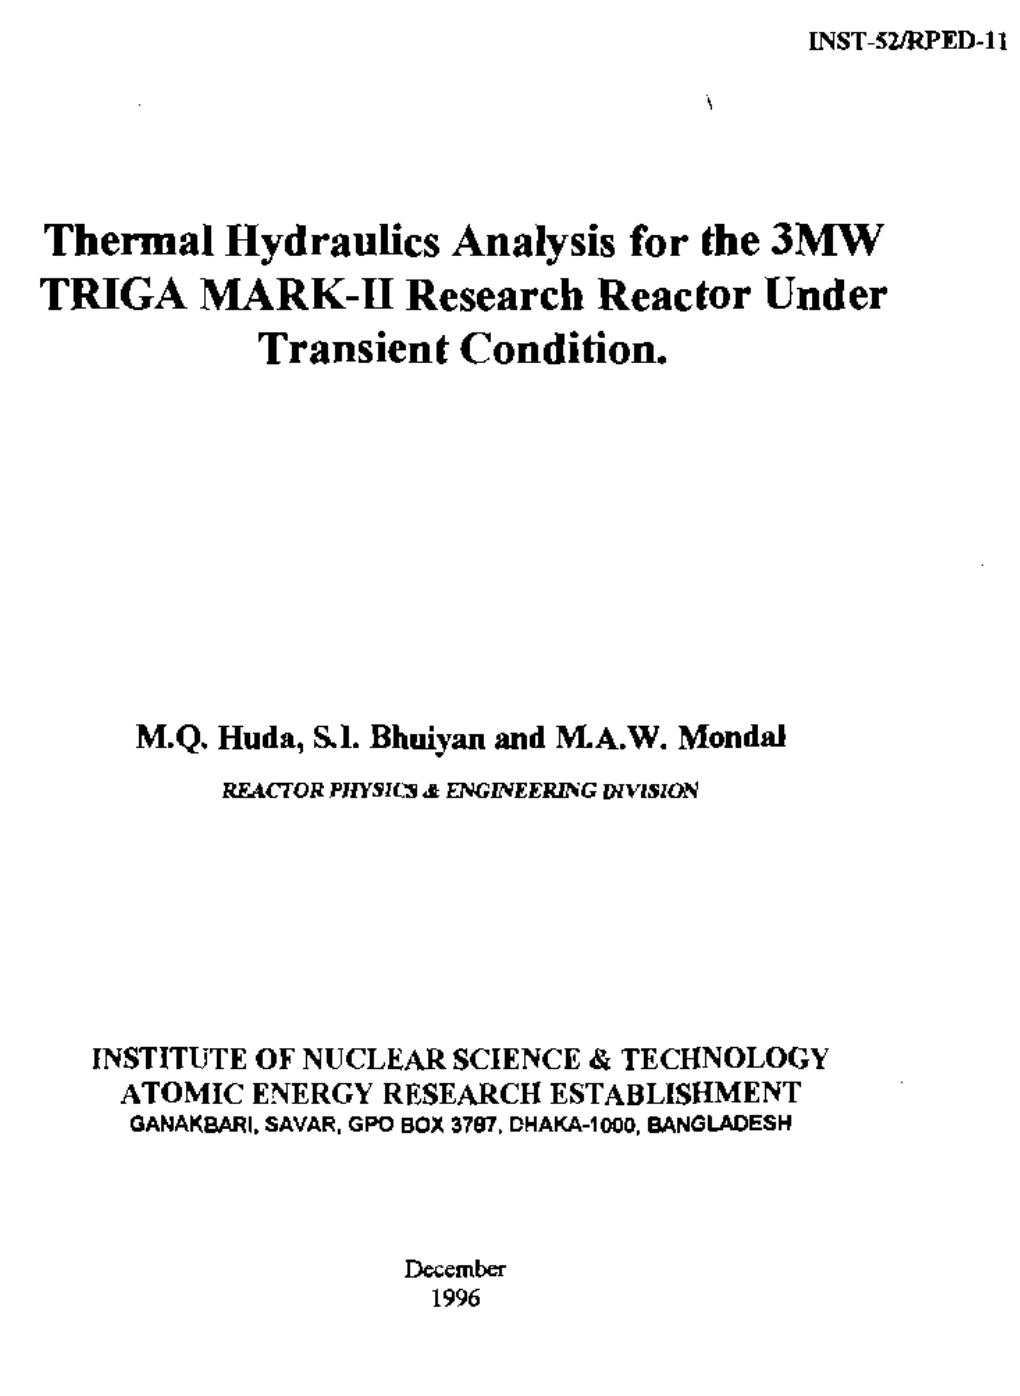 Thermal Hydraulics Analysis for the 3MW TRIGA MARK-H Research Reactor Under Transient Condition